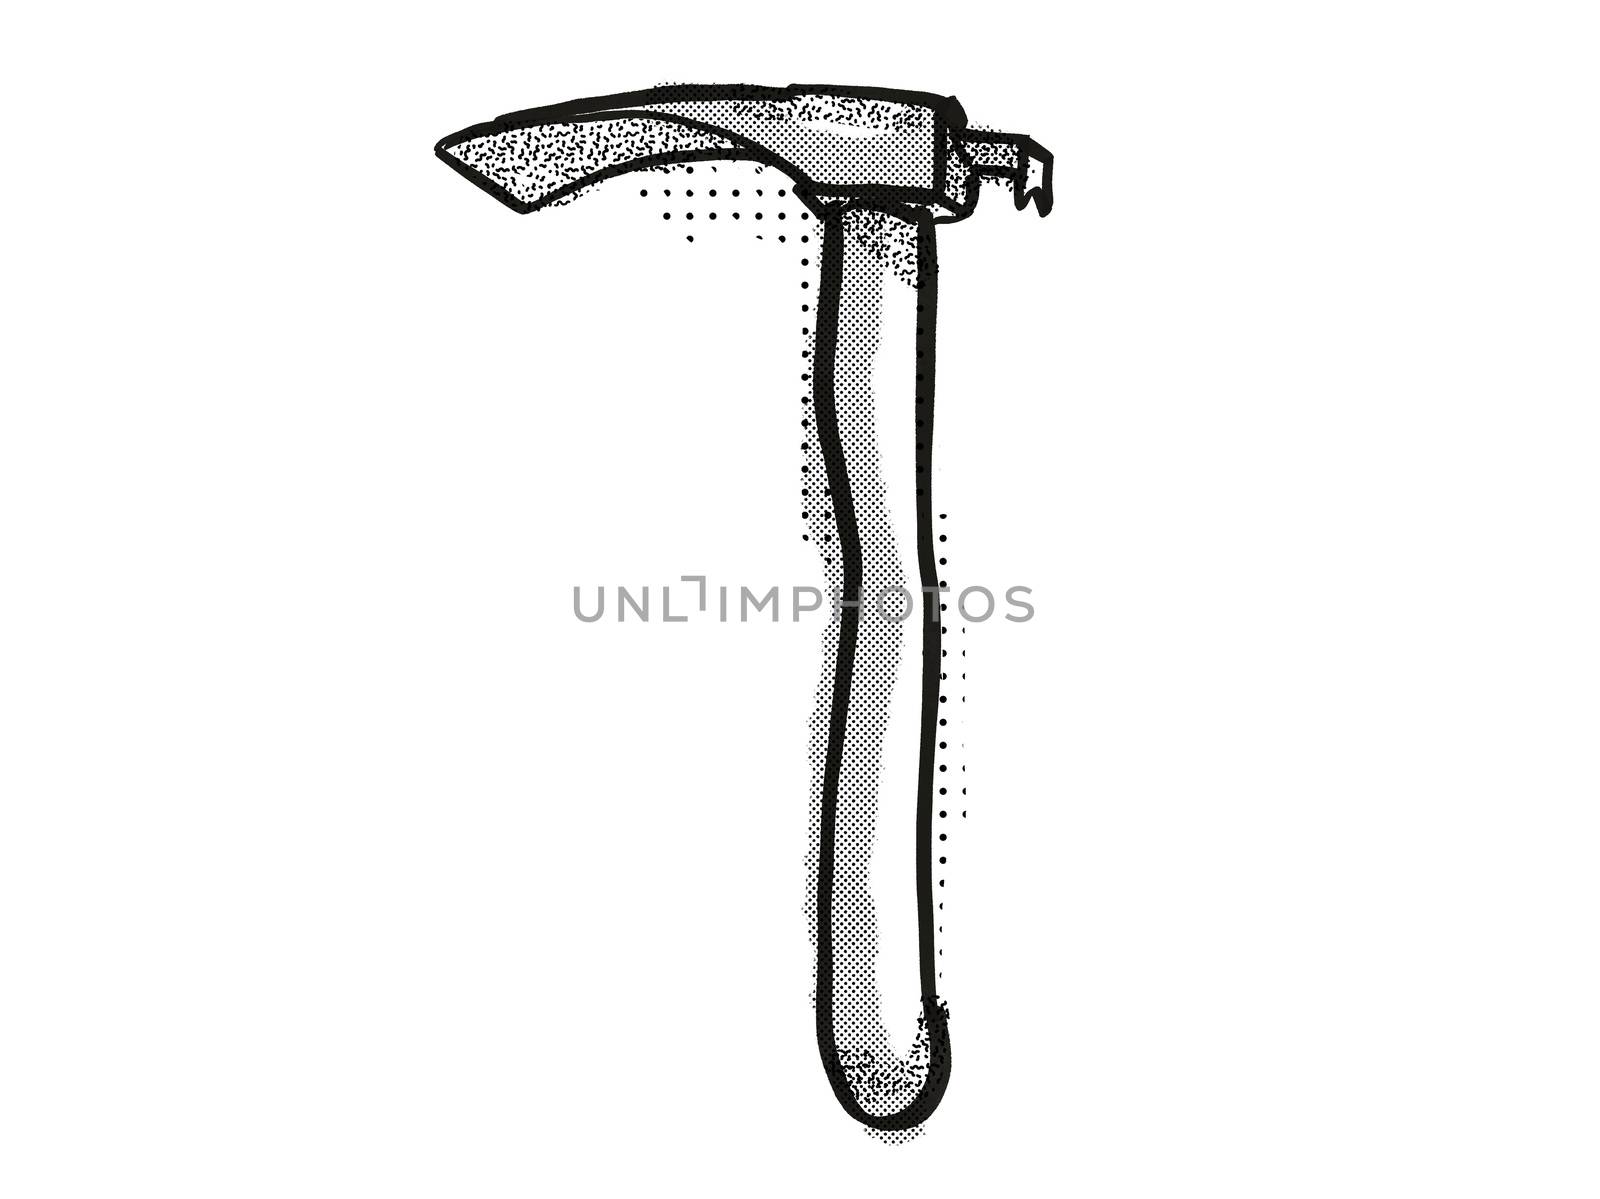 Retro cartoon style drawing of an adze  , a woodworking hand tool  on isolated white background done in black and white